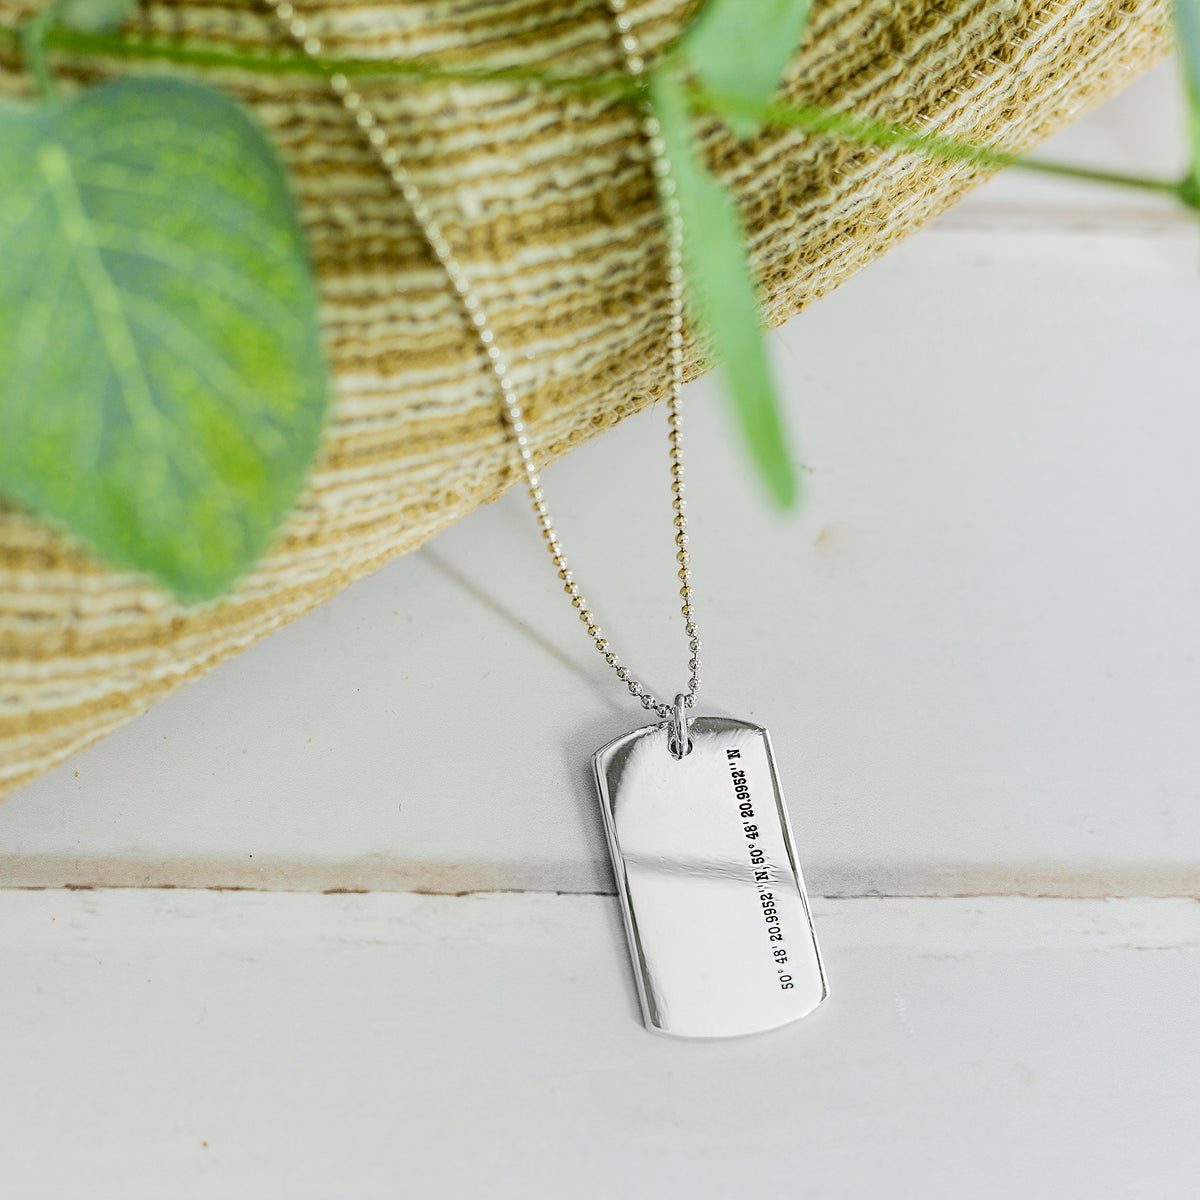 unique mens travel gift necklace engraved with location of home